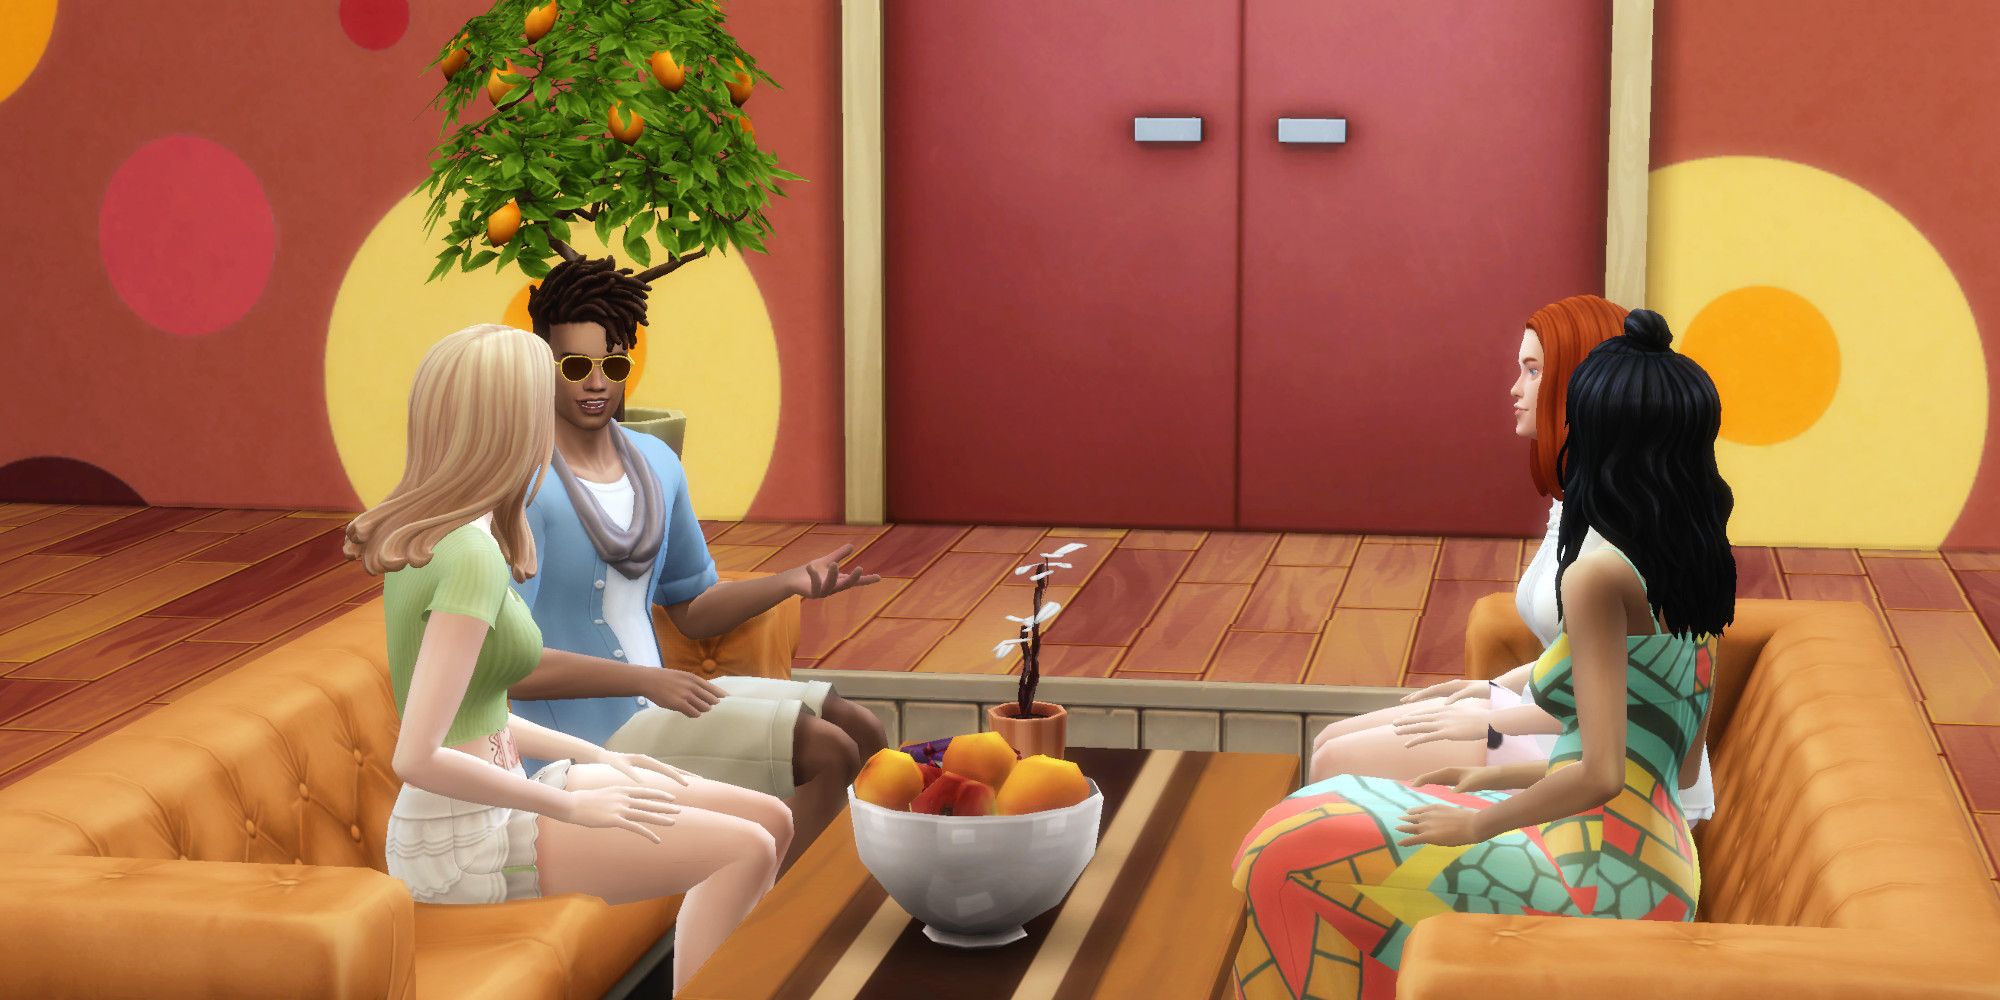 Four Sims from The Sims 4 having a conversation in a brightly colored room